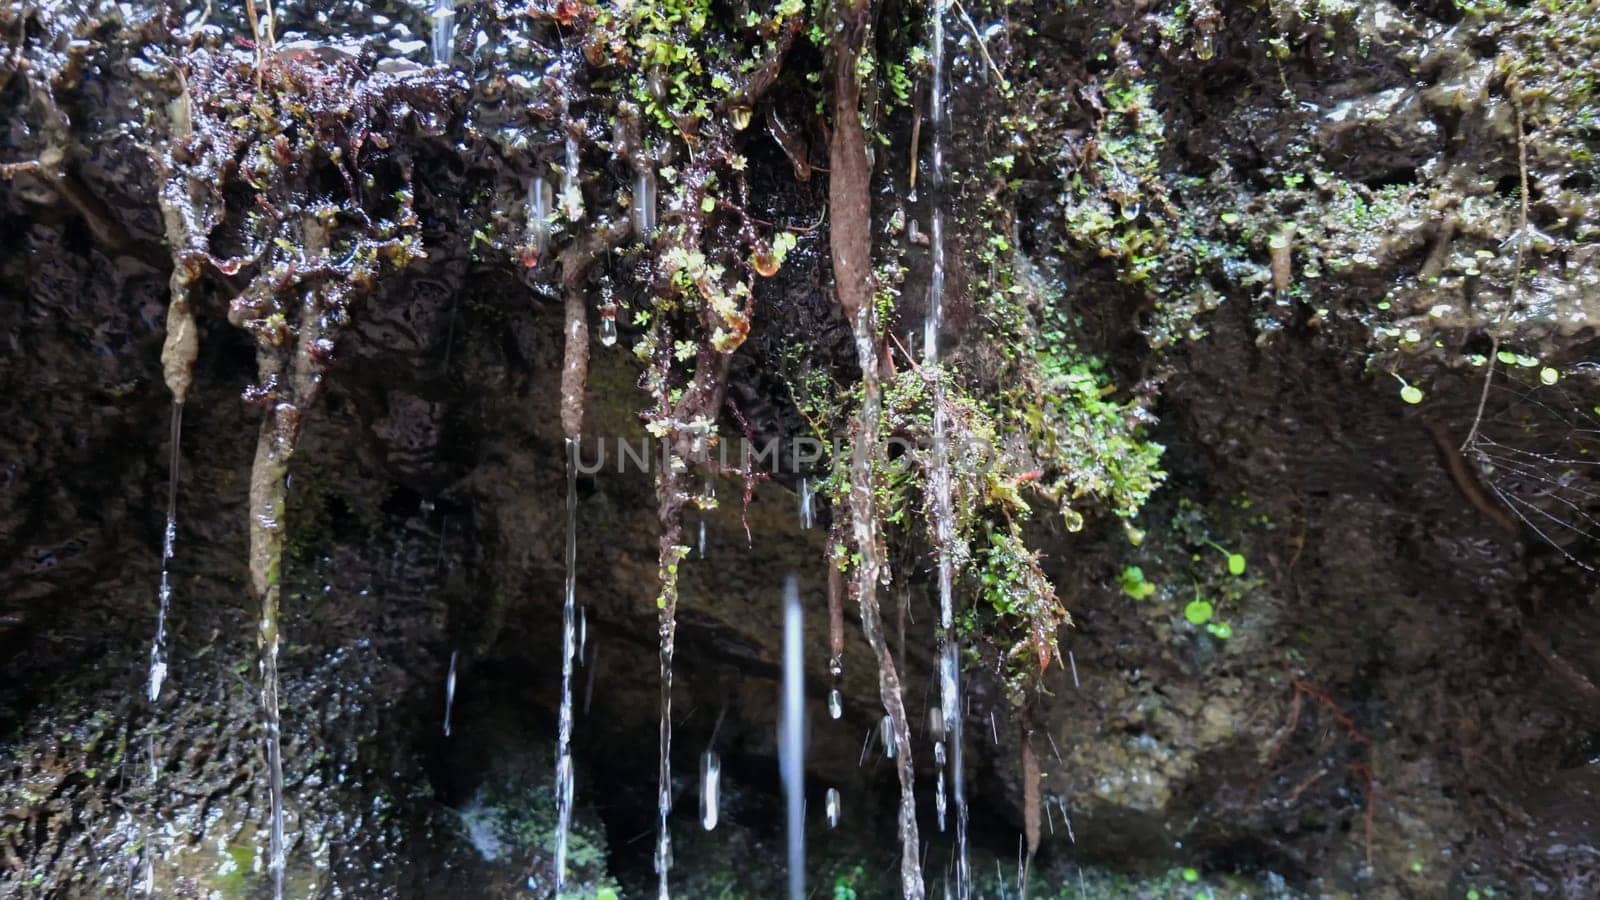 Super Slow Motion of Mossy Rock with Cascading Water Drops by FerradalFCG